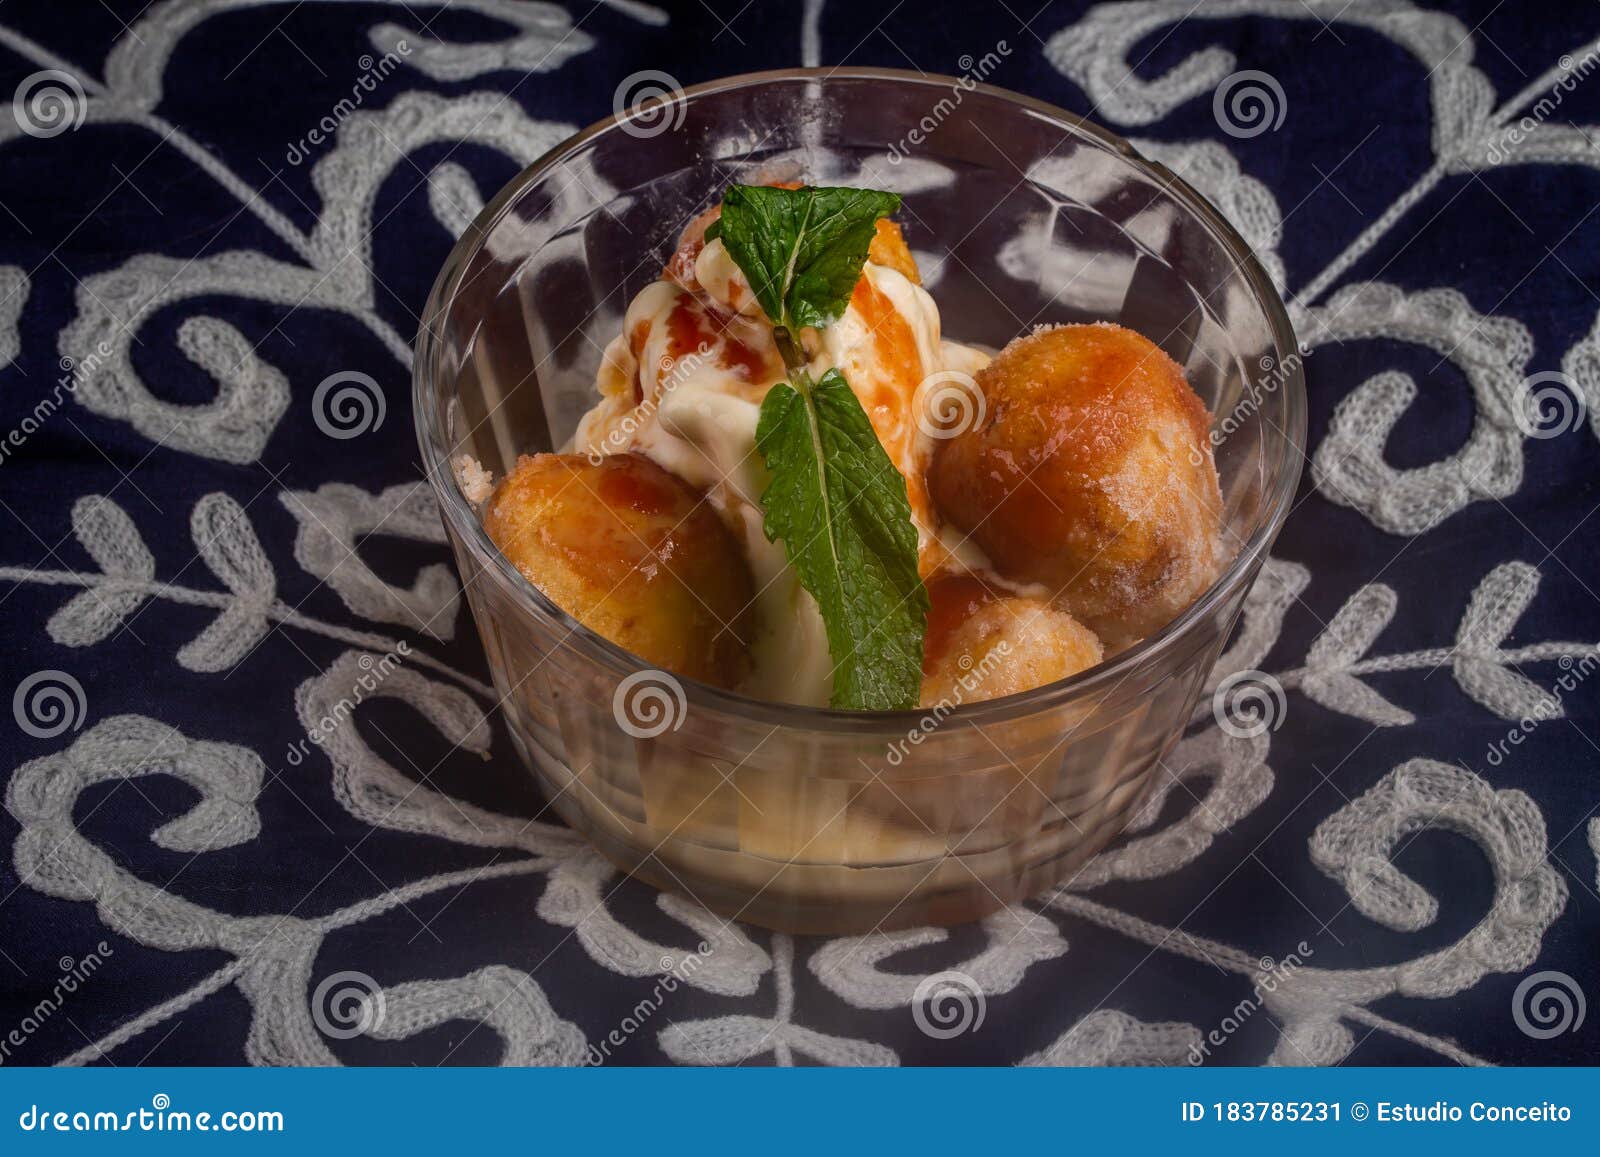 mini fried cakes with sugar and traditional cinnamon from brazil where they are called a bolinho de chuva. pictured is served with